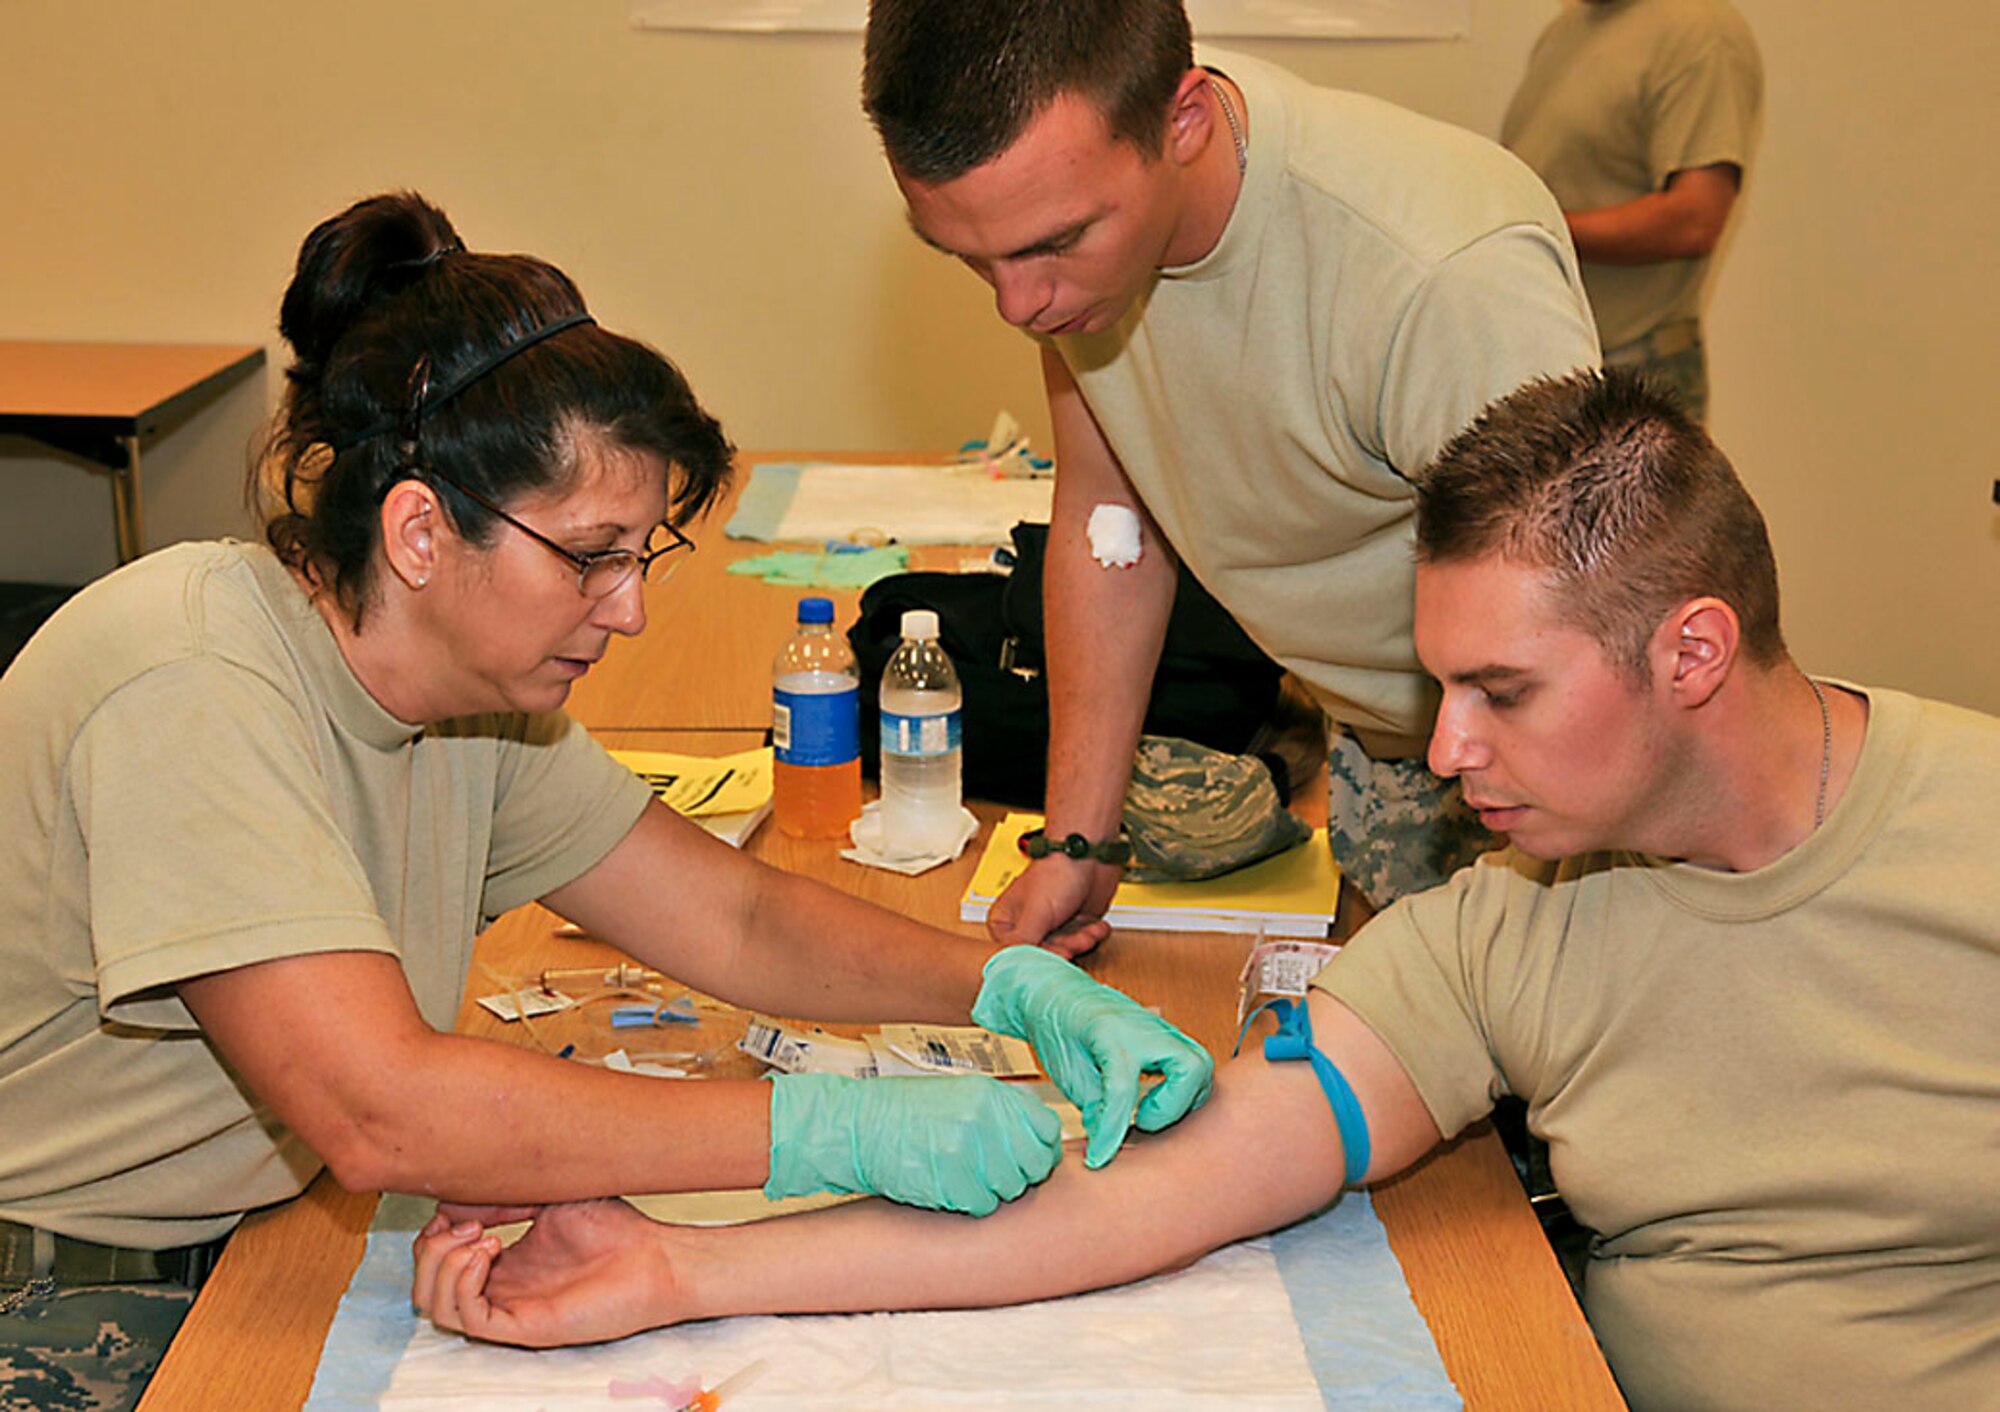 Tech. Sgt. Samm (right) draws blood from Staff Sgt. Love (left) while the instructor watches during Combat Lifesavers Course. Photo by Master Sgt. John Day